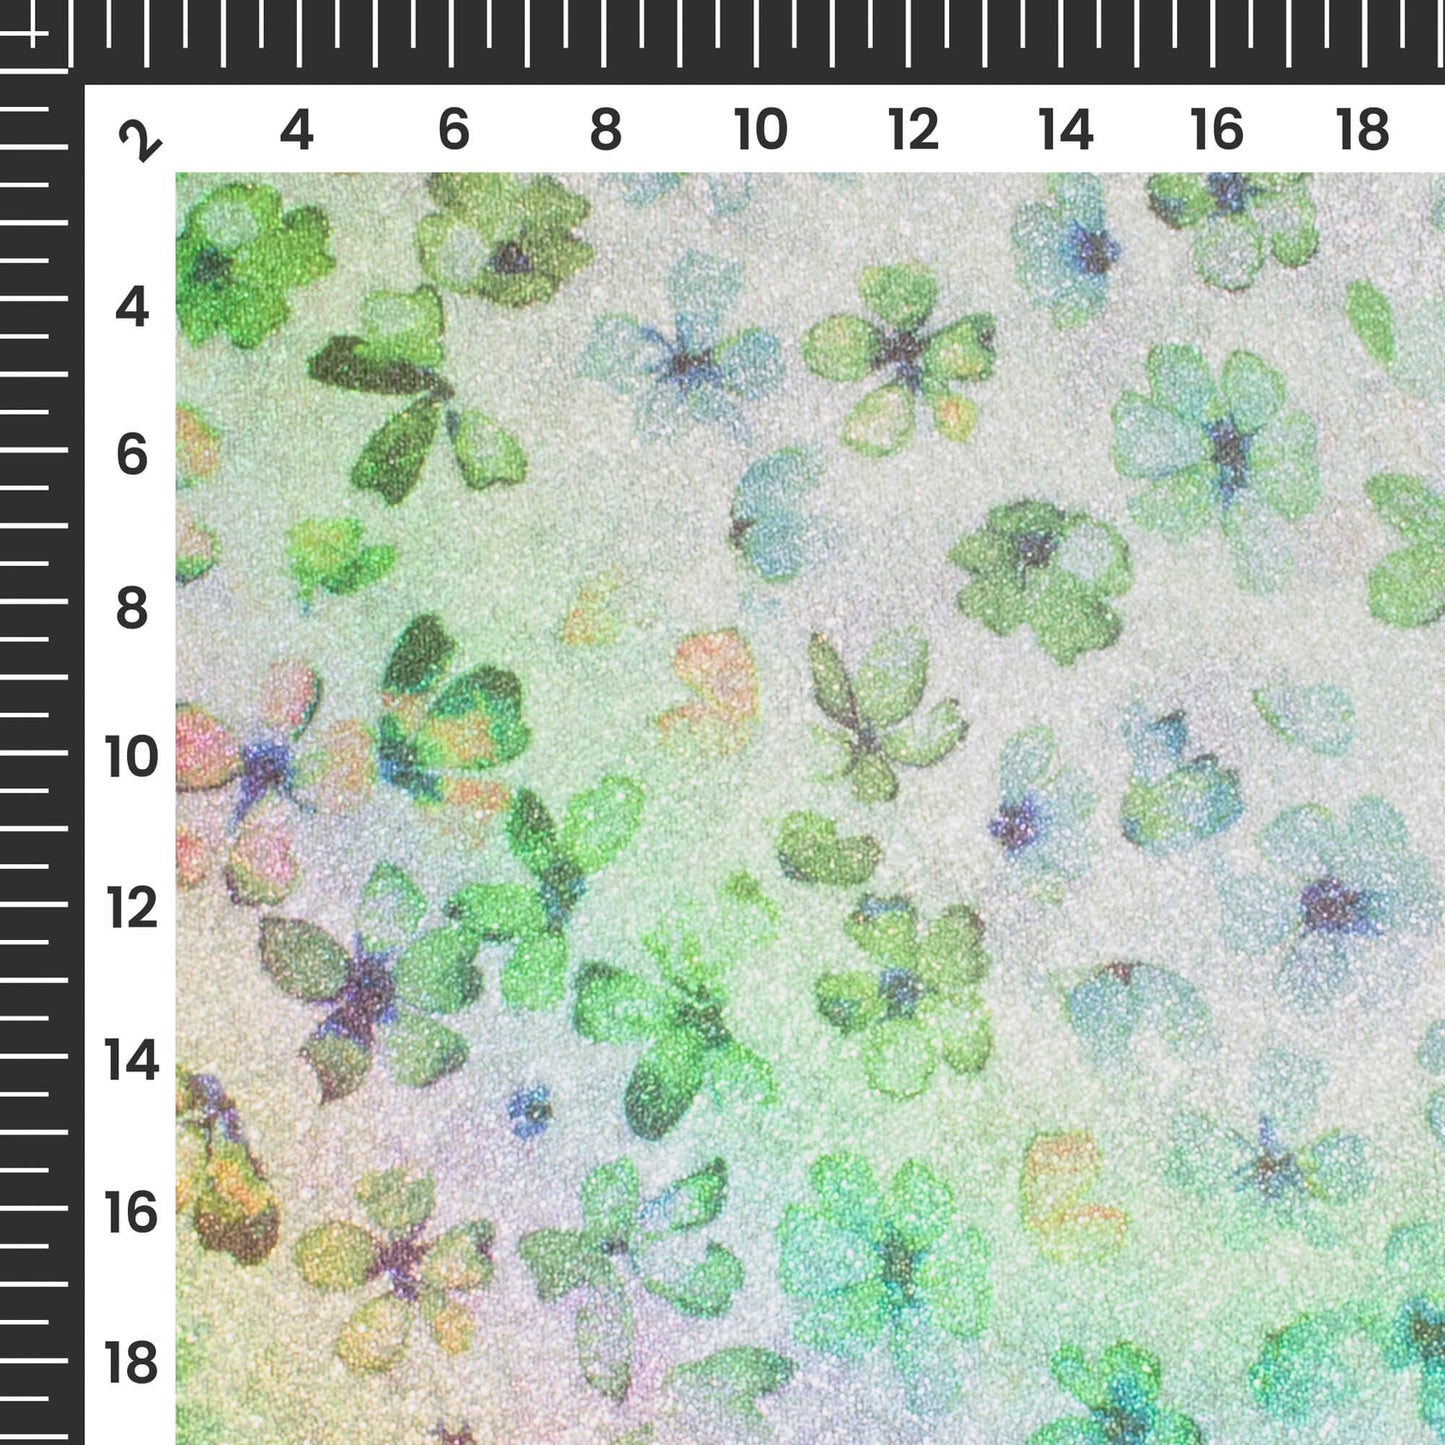 Green Floral Dual Tones Galaxy Imported Net Fabric